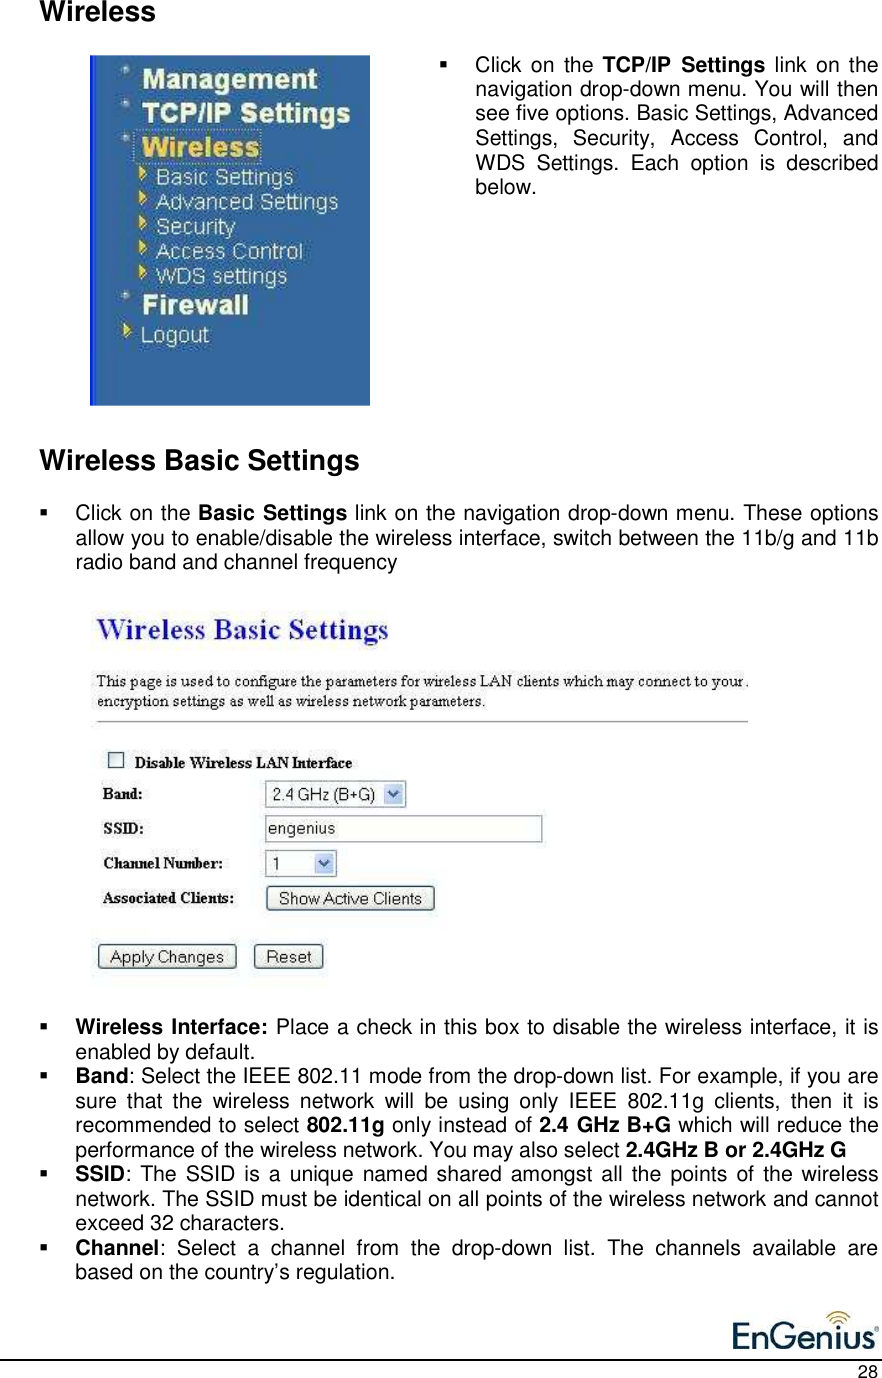    28    Wireless   Click on  the  TCP/IP  Settings link  on the navigation drop-down menu. You will then see five options. Basic Settings, Advanced Settings,  Security,  Access  Control,  and WDS  Settings.  Each  option  is  described below.              Wireless Basic Settings   Click on the Basic Settings link on the navigation drop-down menu. These options allow you to enable/disable the wireless interface, switch between the 11b/g and 11b radio band and channel frequency                    Wireless Interface: Place a check in this box to disable the wireless interface, it is enabled by default.   Band: Select the IEEE 802.11 mode from the drop-down list. For example, if you are sure  that  the  wireless  network  will  be  using  only  IEEE  802.11g  clients,  then  it  is recommended to select 802.11g only instead of 2.4 GHz B+G which will reduce the performance of the wireless network. You may also select 2.4GHz B or 2.4GHz G  SSID: The SSID is a  unique named shared  amongst all  the points of the wireless network. The SSID must be identical on all points of the wireless network and cannot exceed 32 characters.   Channel:  Select  a  channel  from  the  drop-down  list.  The  channels  available  are based on the country’s regulation.   